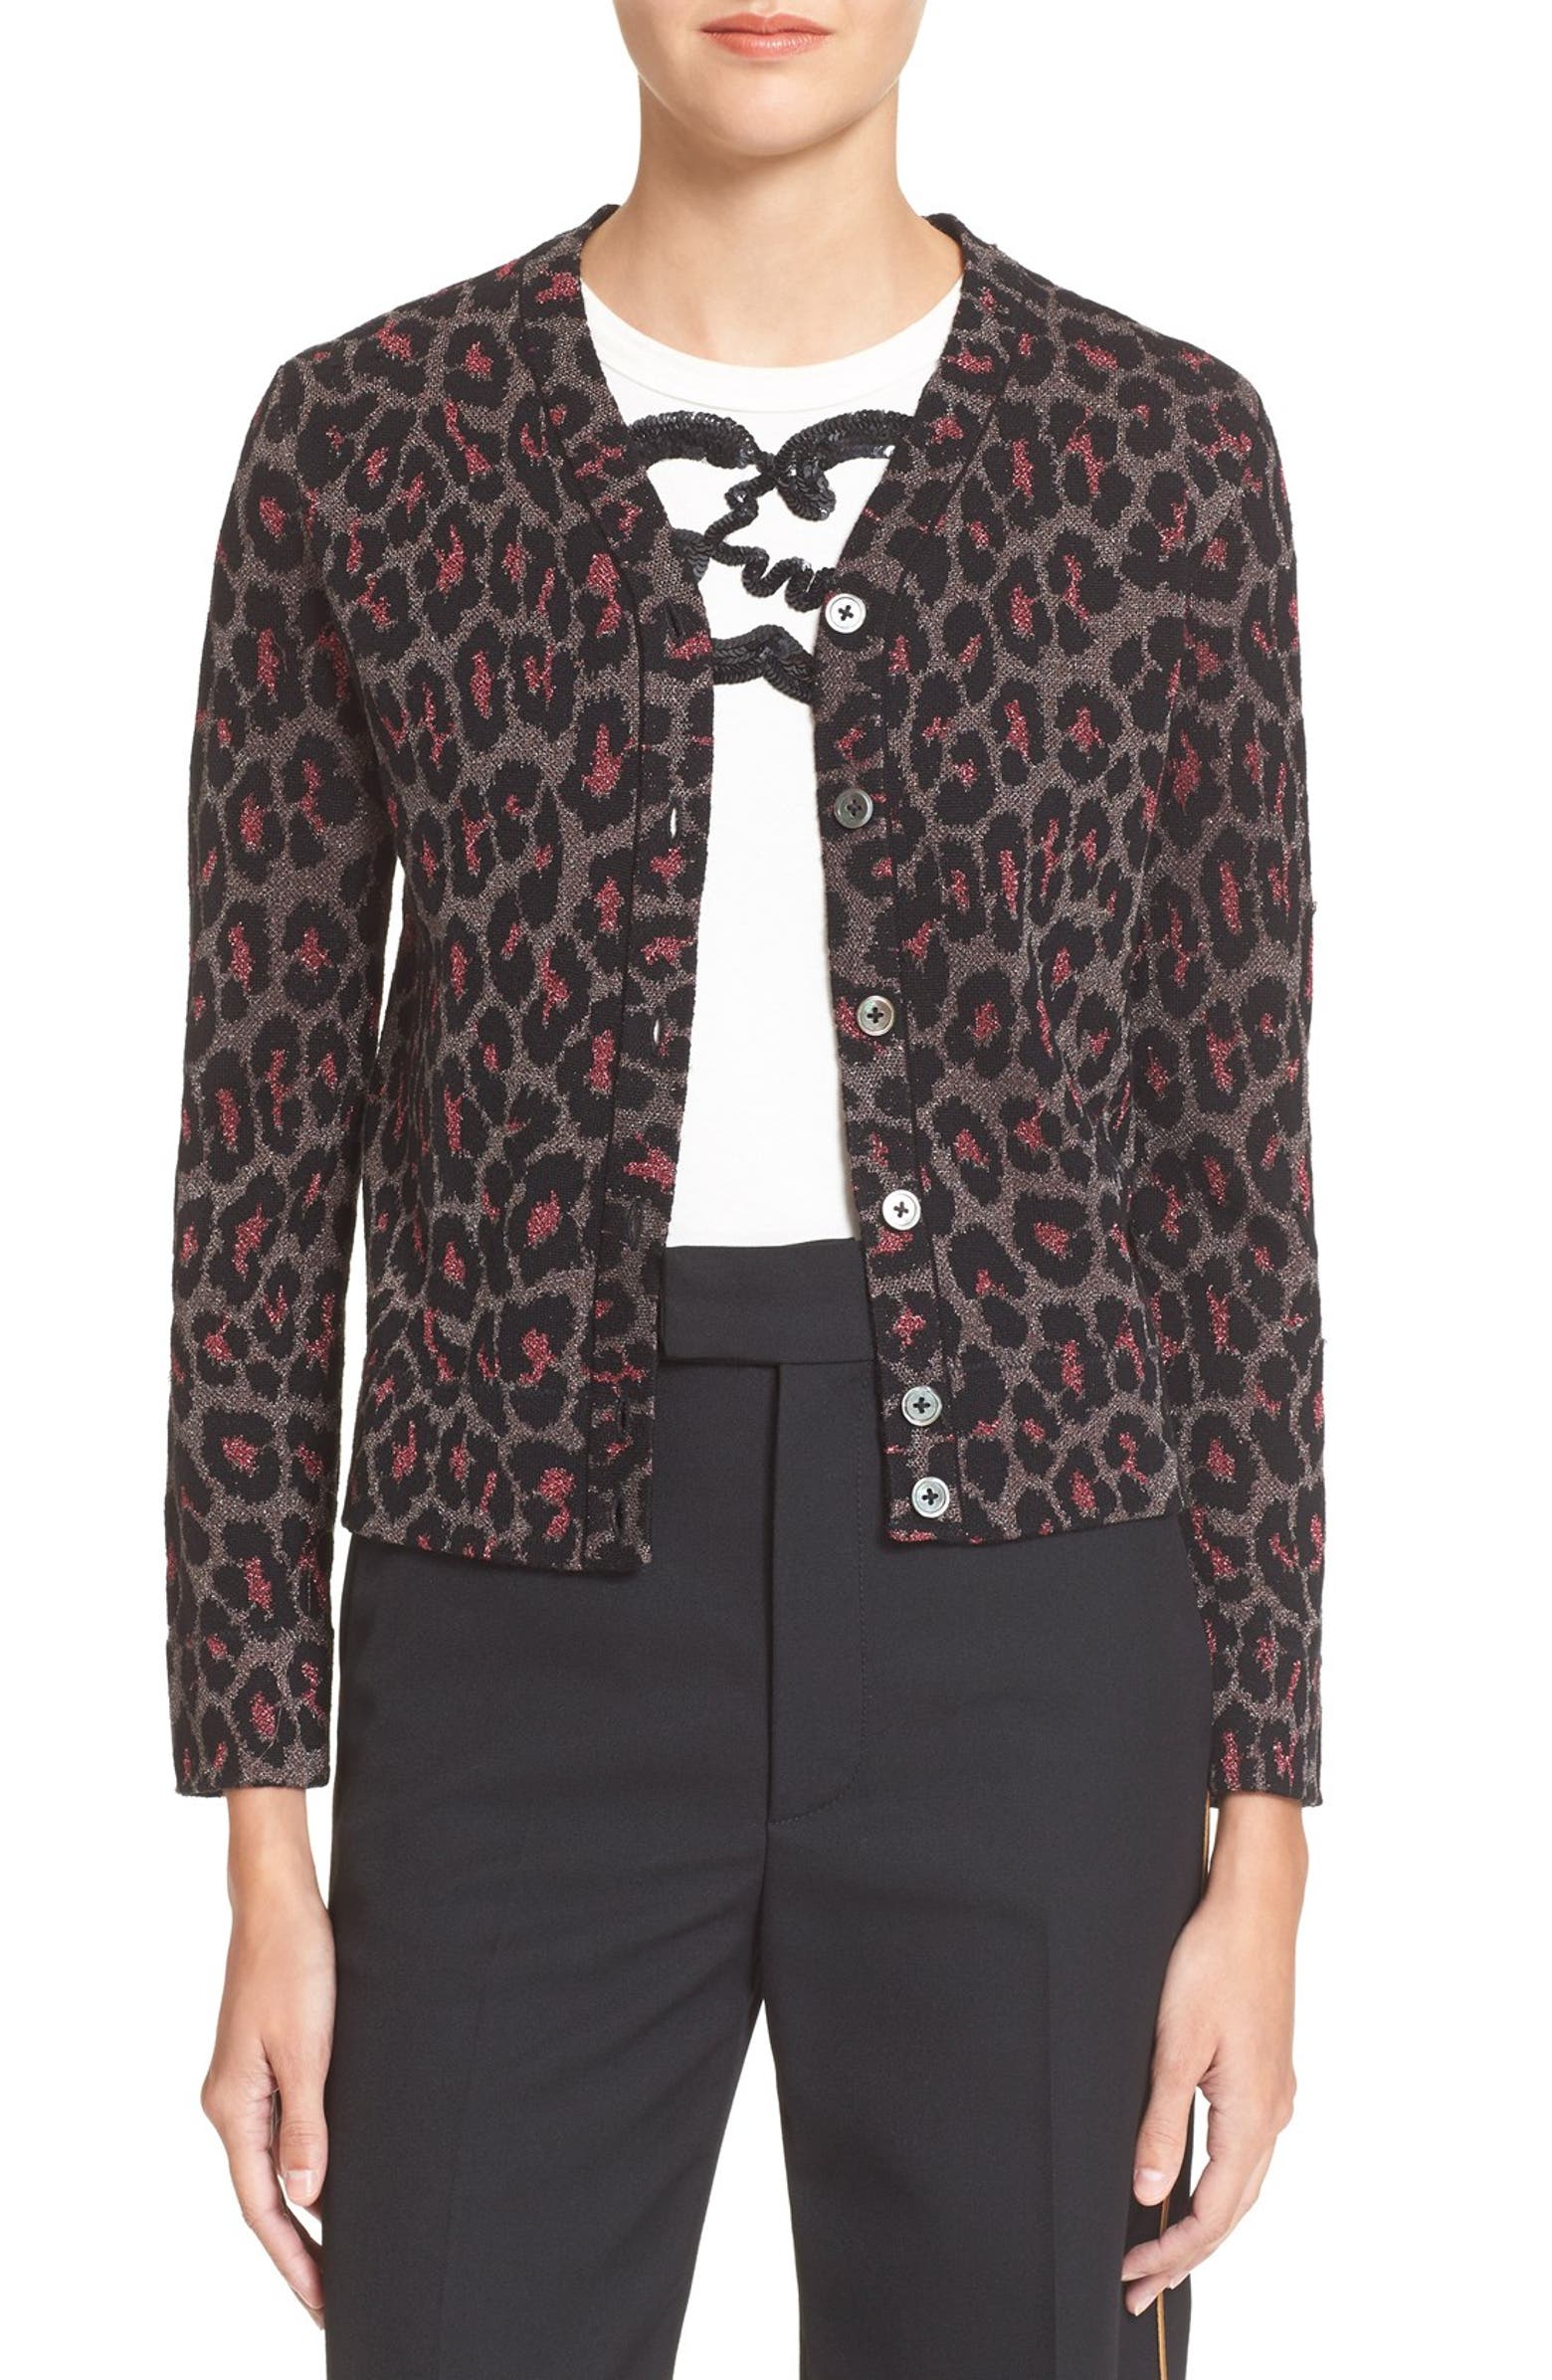 MARC BY MARC JACOBS Leopard Jacquard Cardigan | Nordstrom